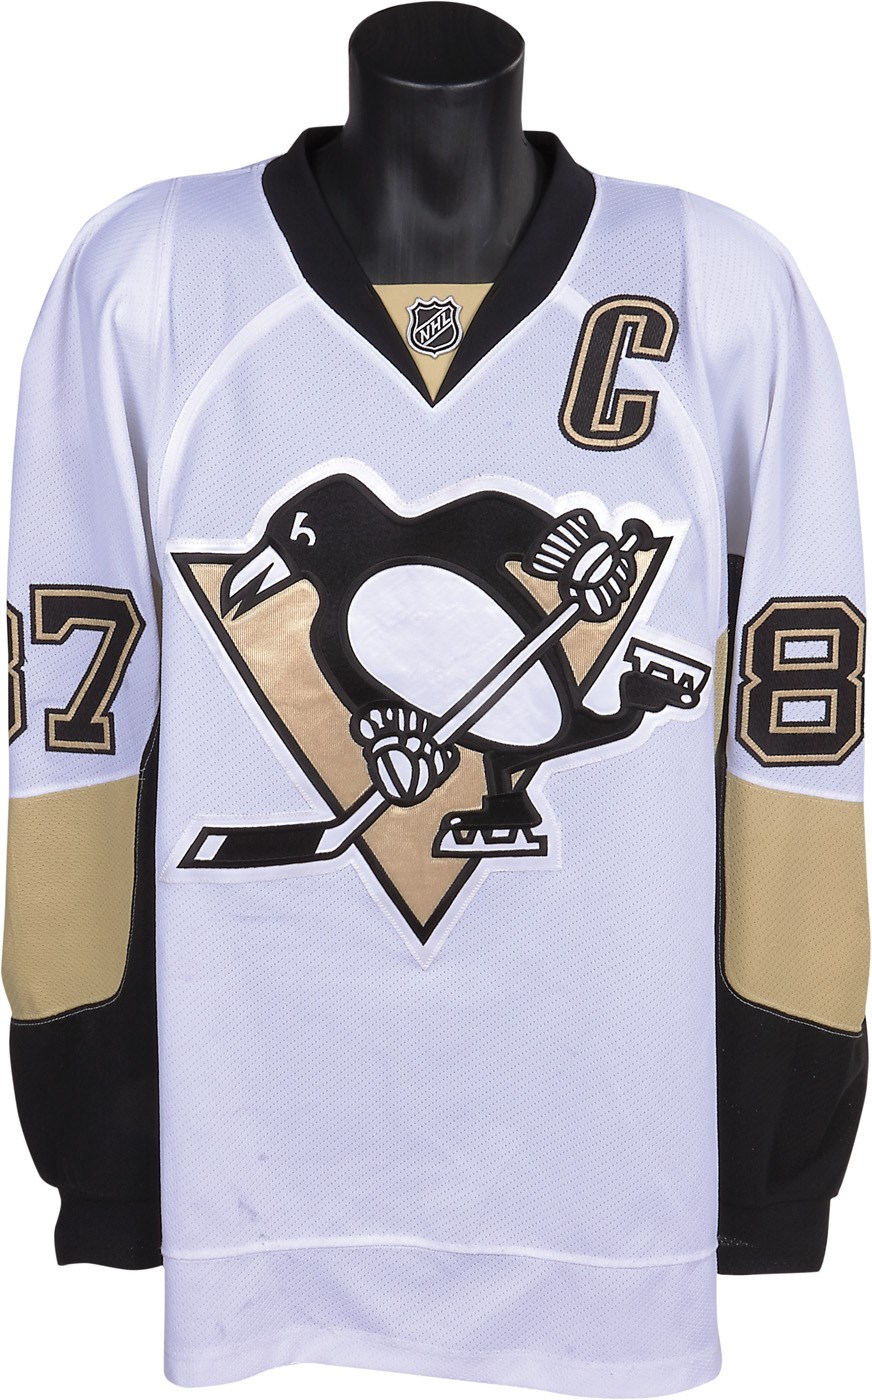 2015-16 Sidney Crosby Game Worn Pittsburgh Penguins Jersey - Photo-Matched & Worn in 17 Games (Penguins LOA & Jersey Trak)